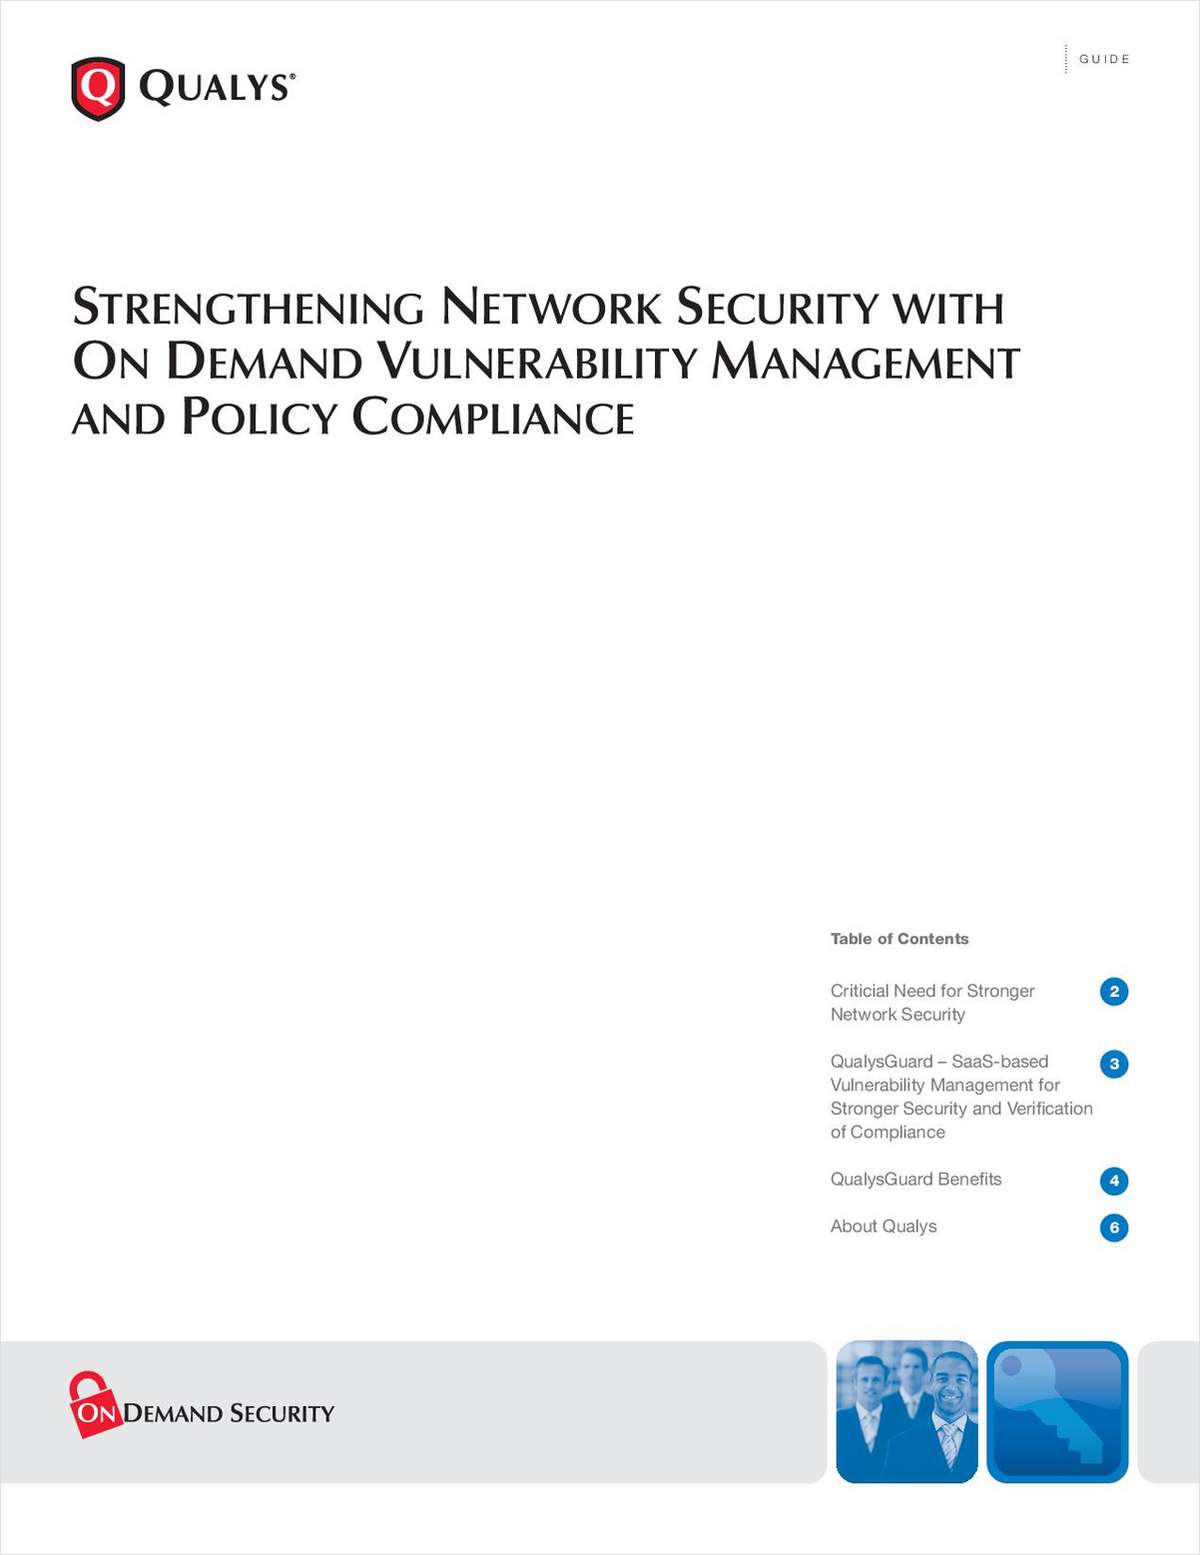 Strengthening Network Security with On Demand Vulnerability Management & Policy Compliance